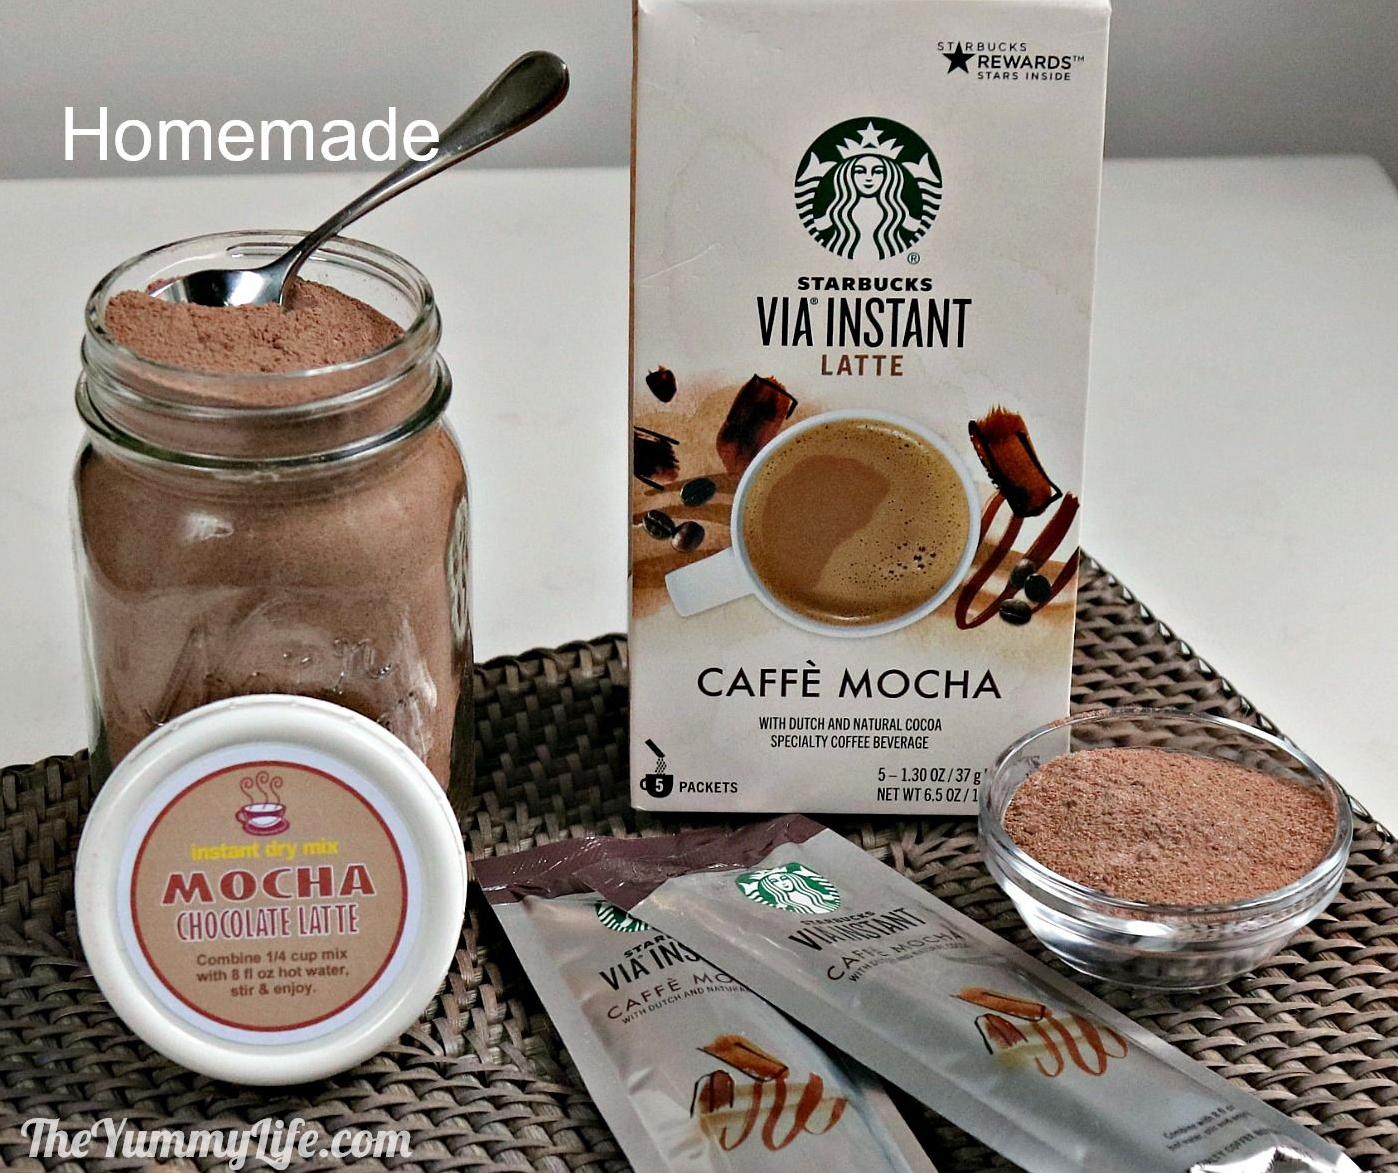  Perk up your day with a sip of mocha